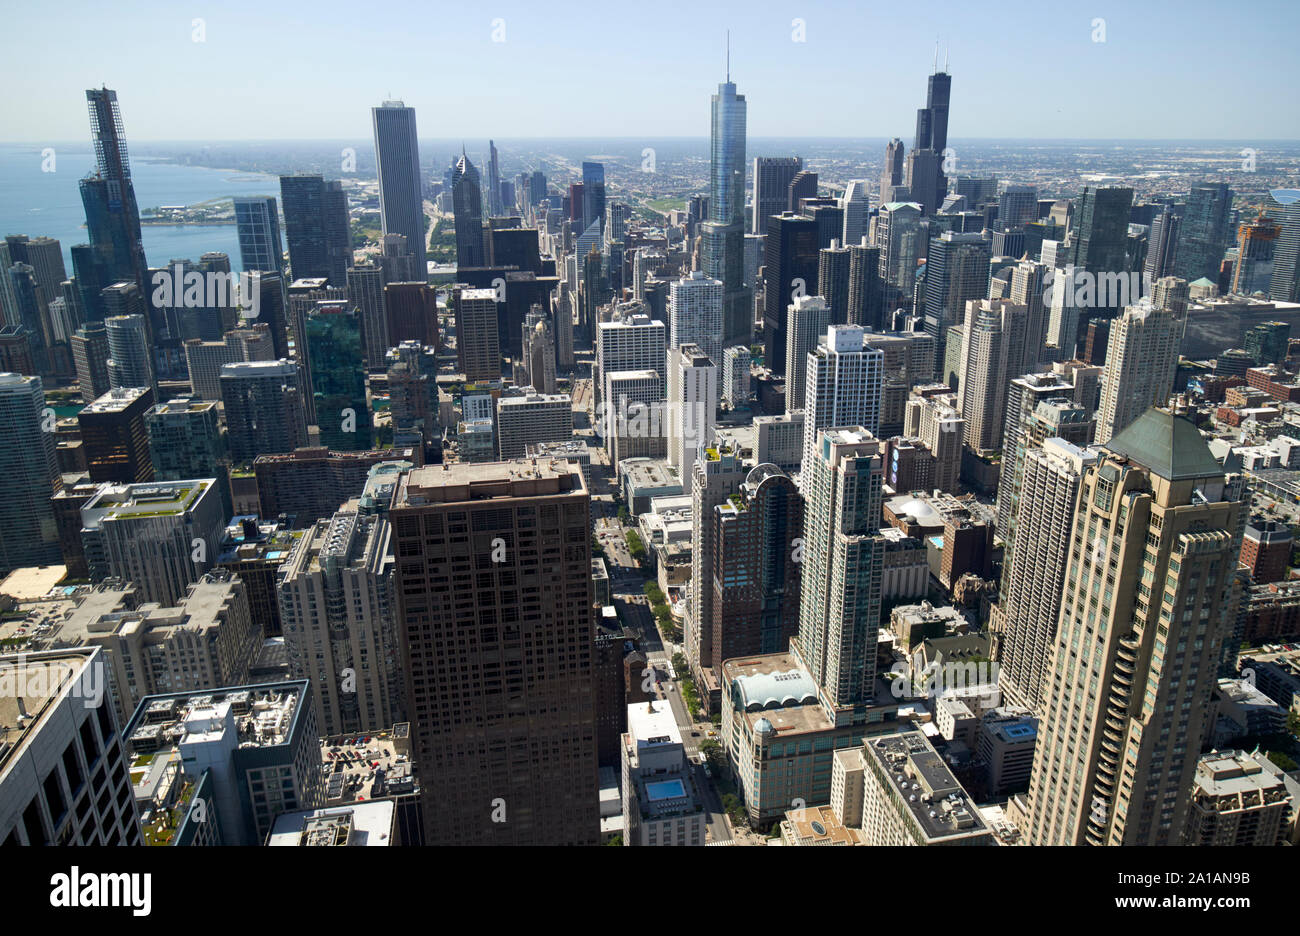 view over streeterville and chicago loop seen through the windows of the john hancock center chicago illinois united states of america Stock Photo